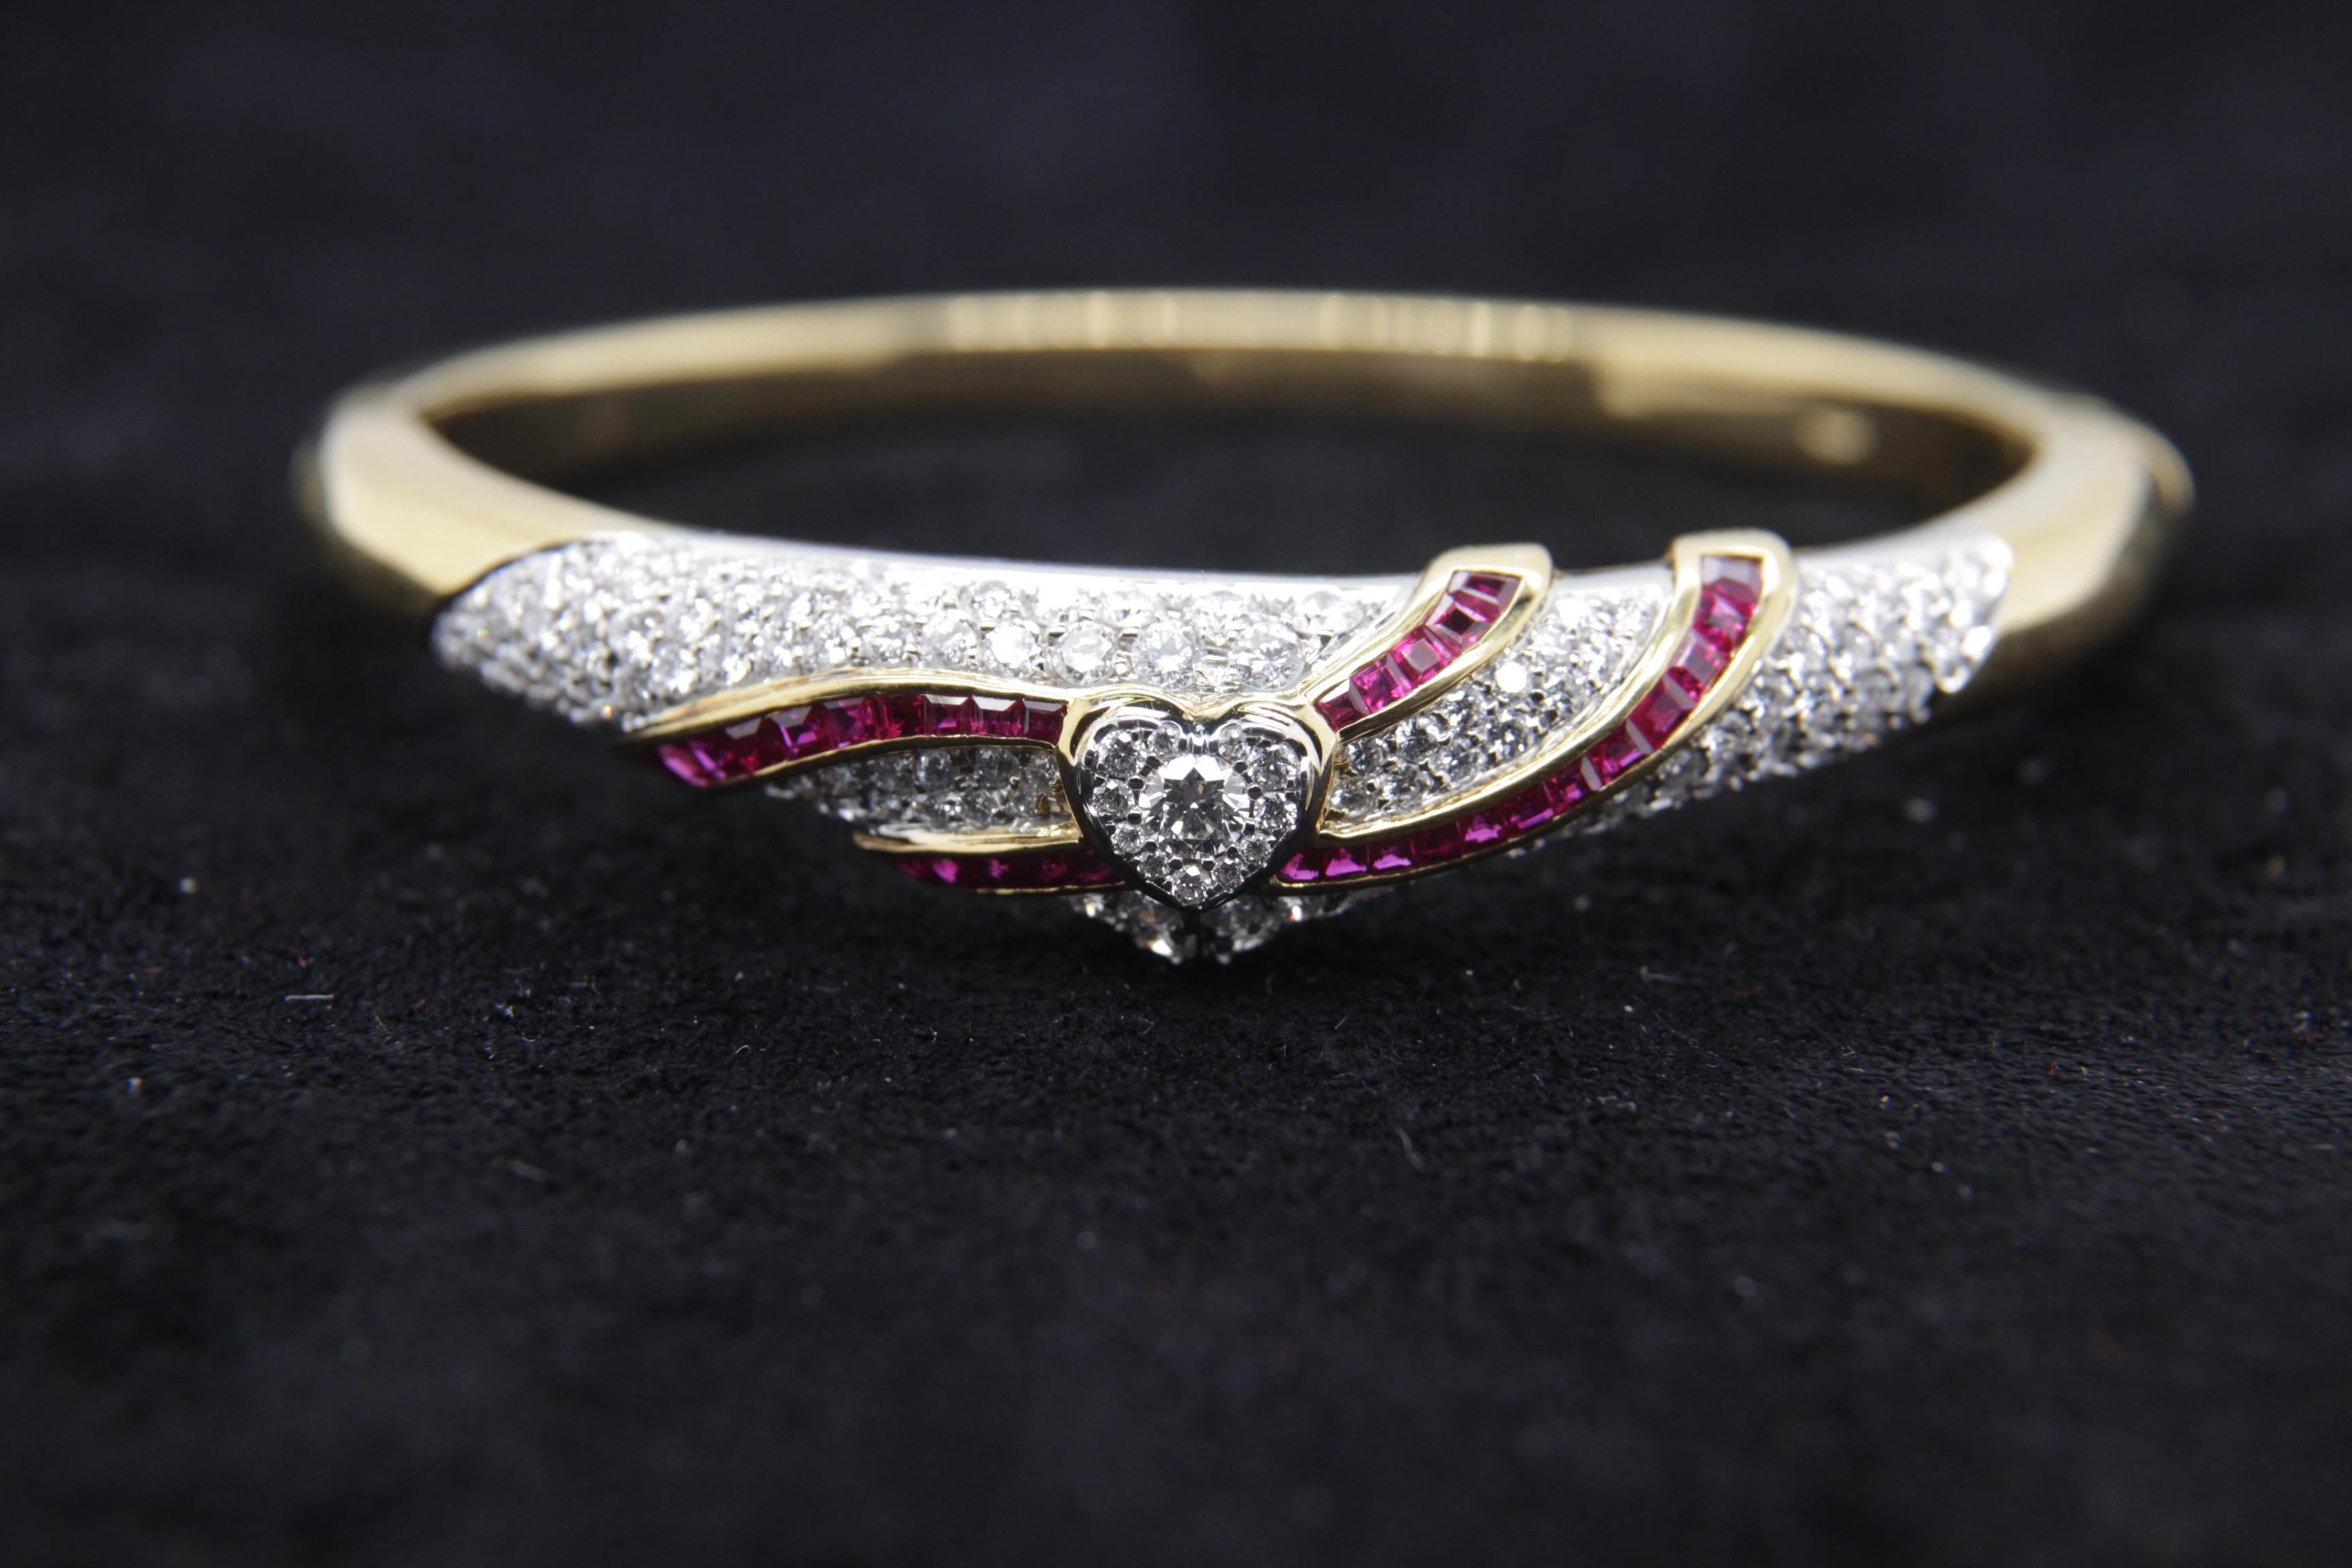 A brand new diamond and ruby bangle in 18 karat gold. The total diamond weight is 3.48 carats and ruby weight is 1.49 carats. The total bangle weight is 31.67 grams.